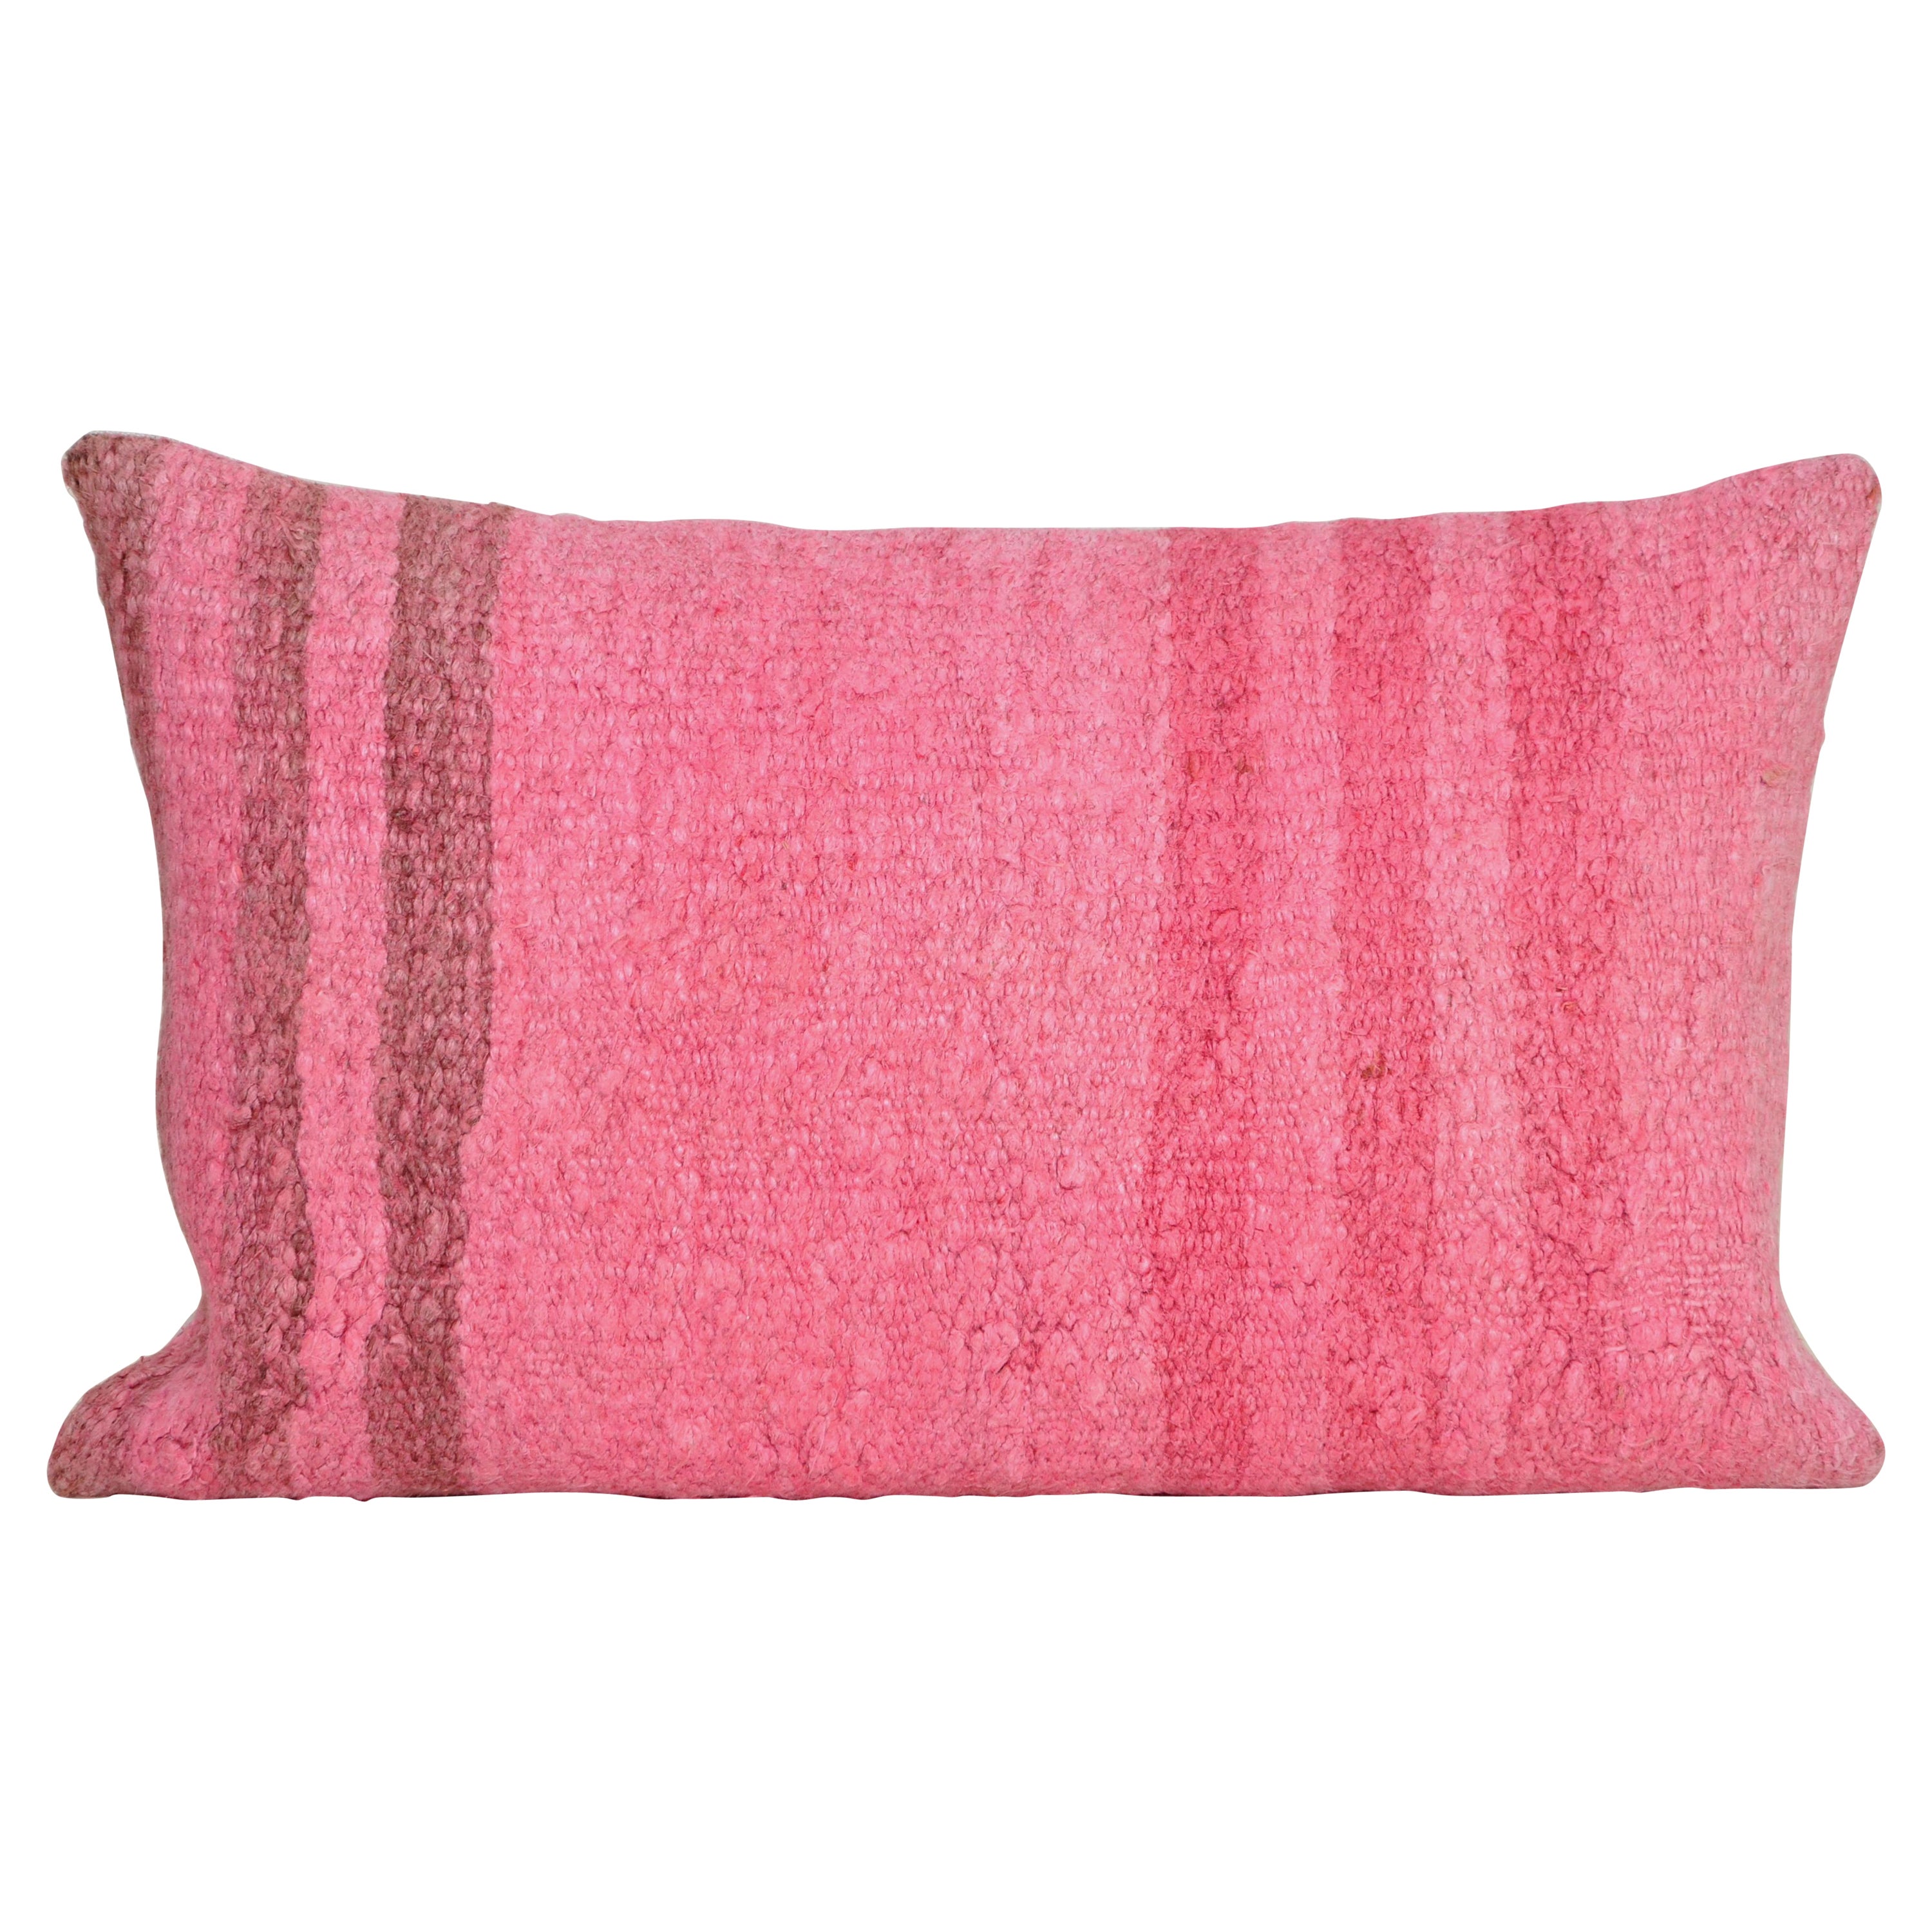 Vintage Kilim Rug Pillow with Irish Linen by Katie Larmour Cushions Pink